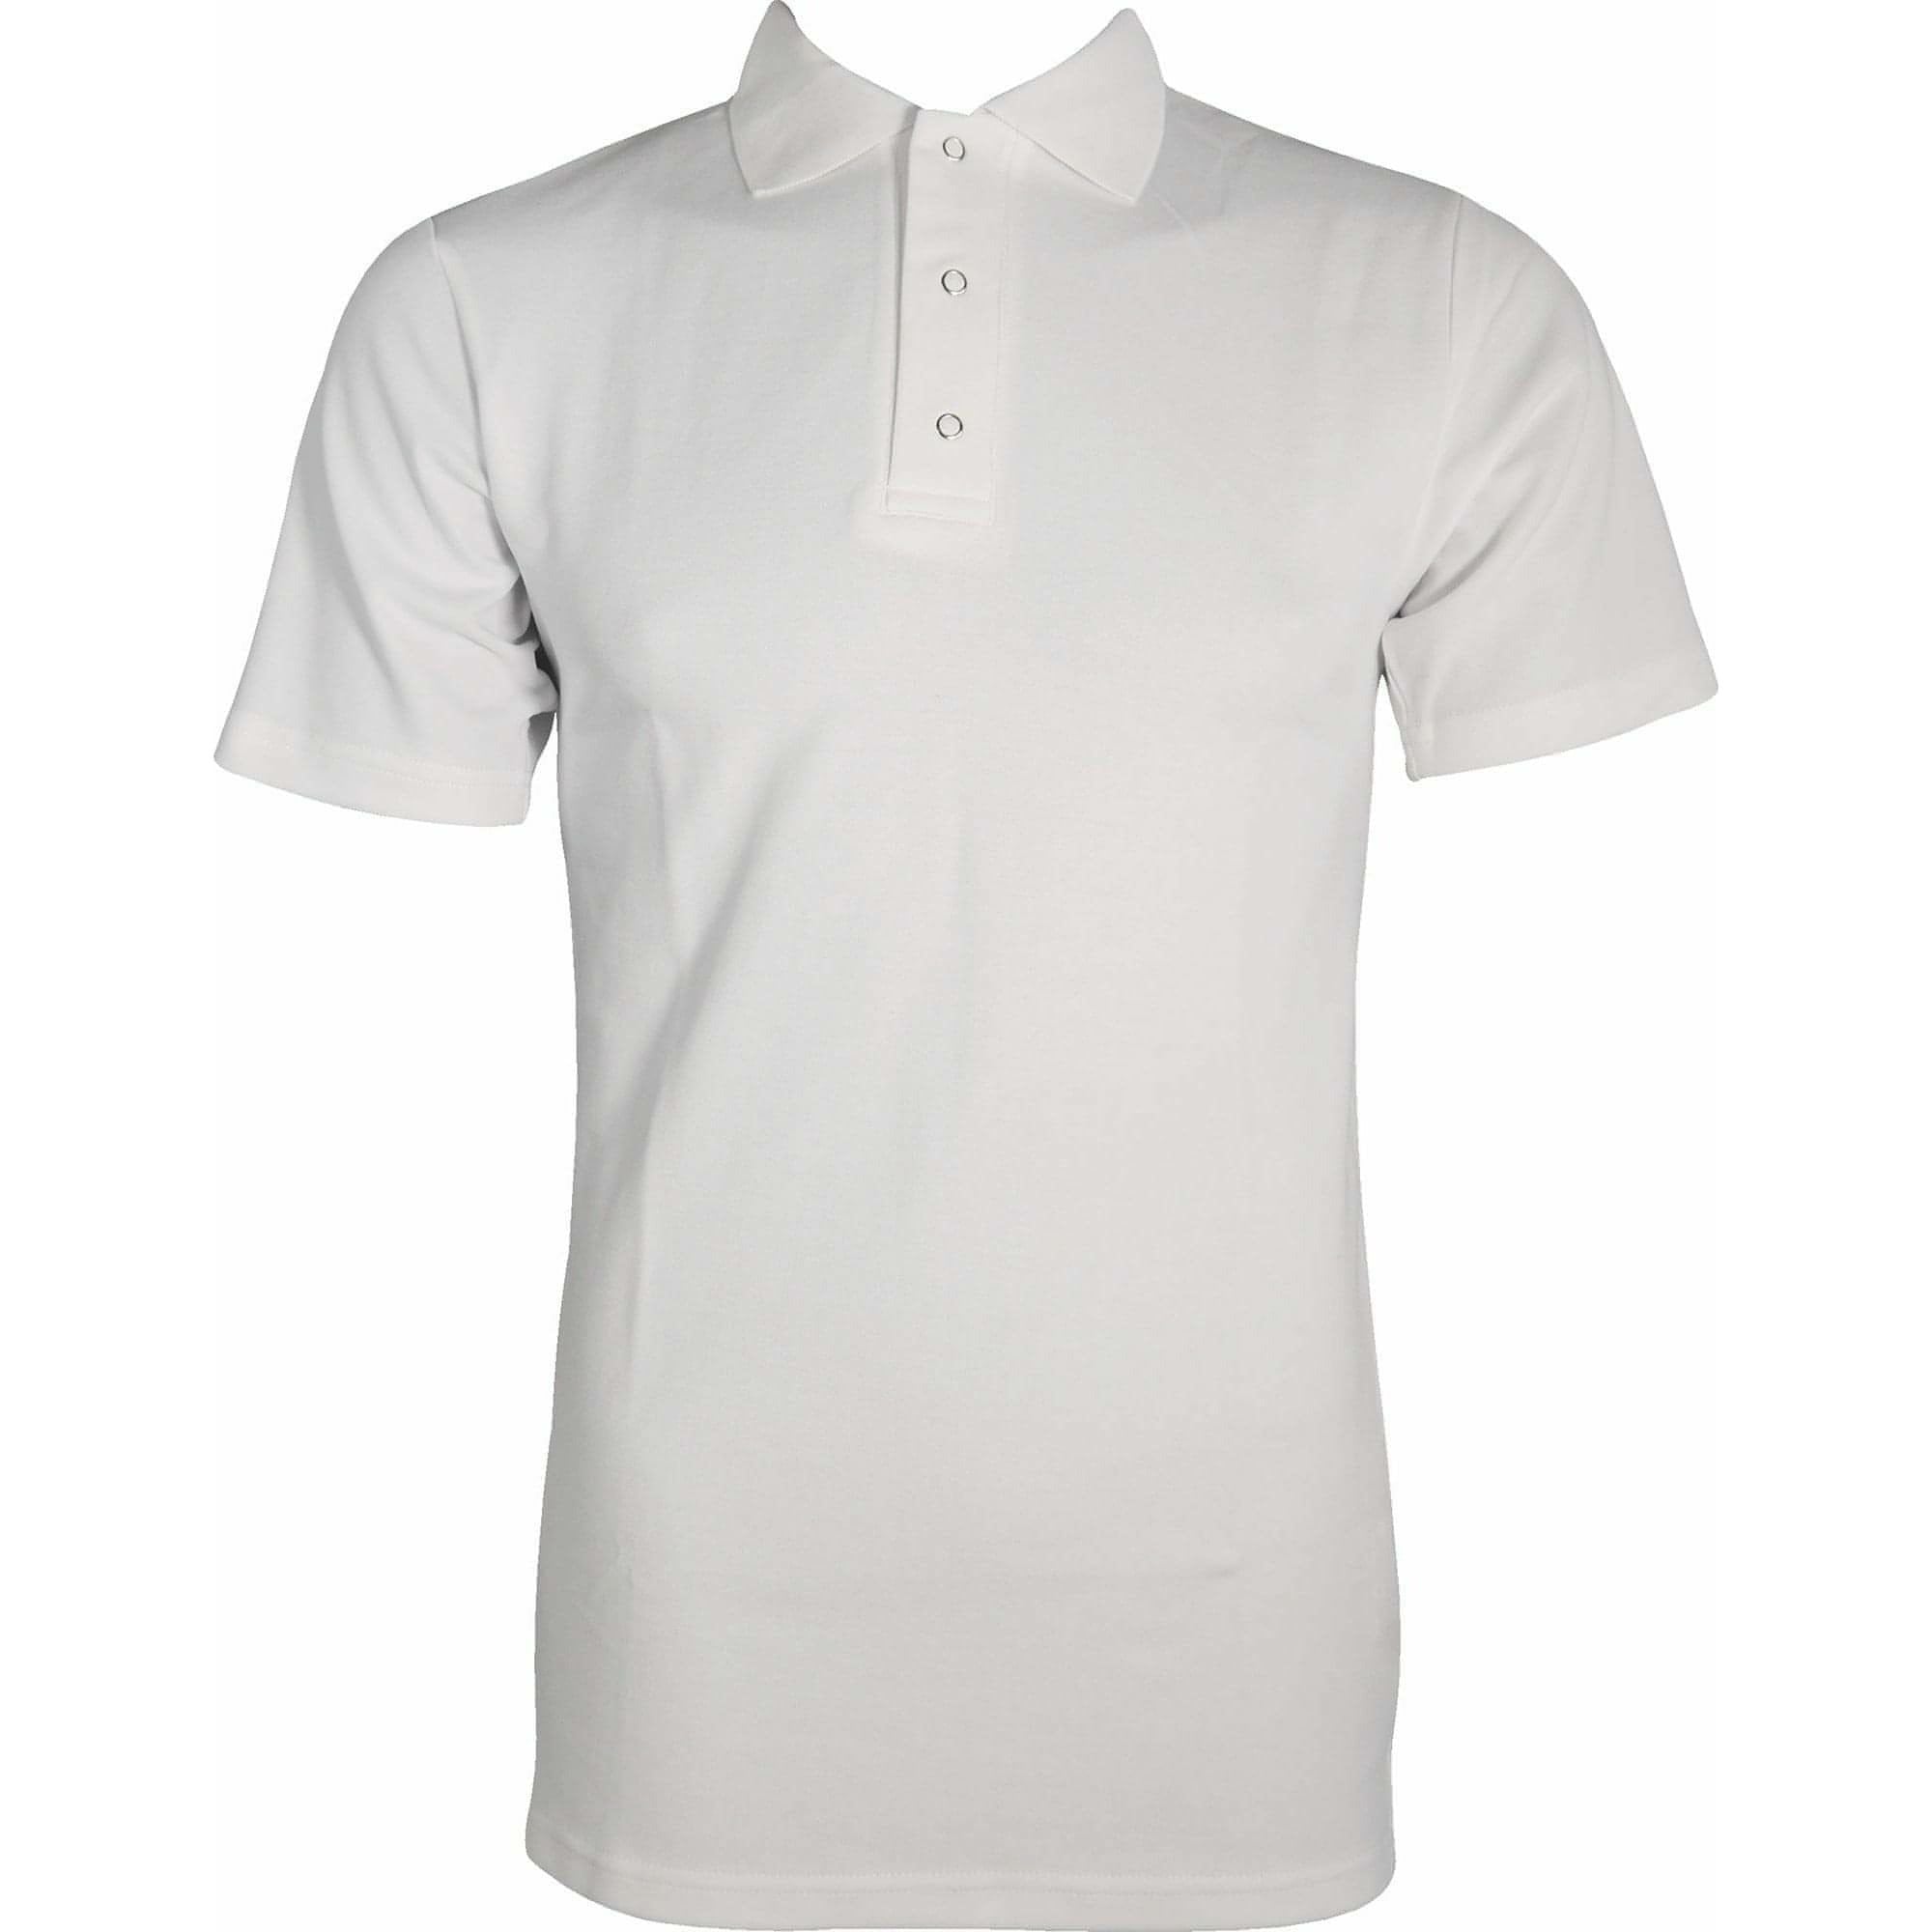 iD Workwear Ultimate Cotton Short Sleeve Mens Polo Shirt - White